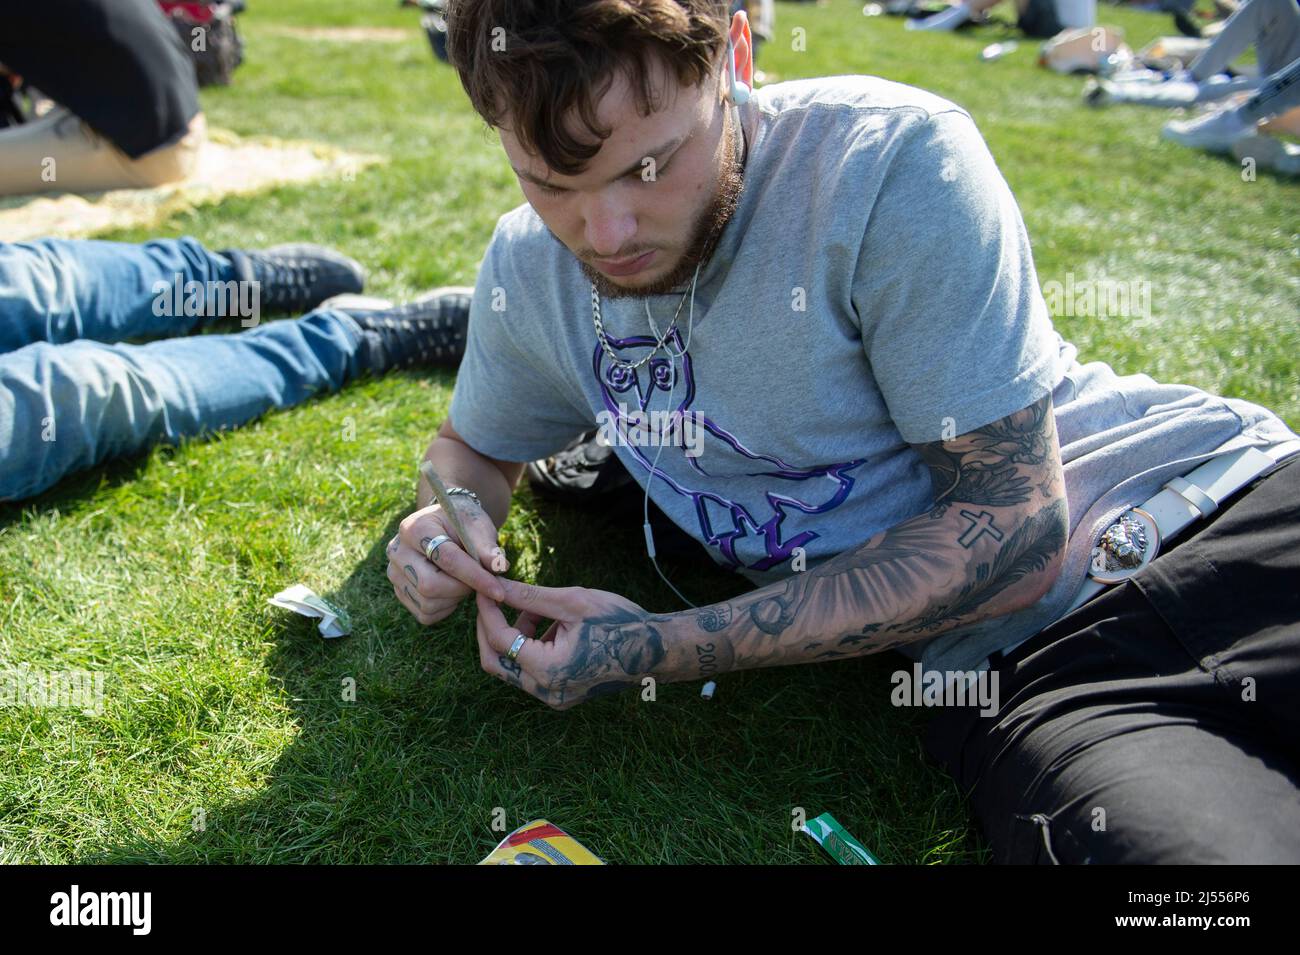 London, UK. 20th Apr, 2022. Hundreds of people gather in Hyde Park to celebrate '420' today ( 20th April). The event is observed annually across the world by thousands of cannabis smokers. Credit: claire doherty/Alamy Live News Stock Photo